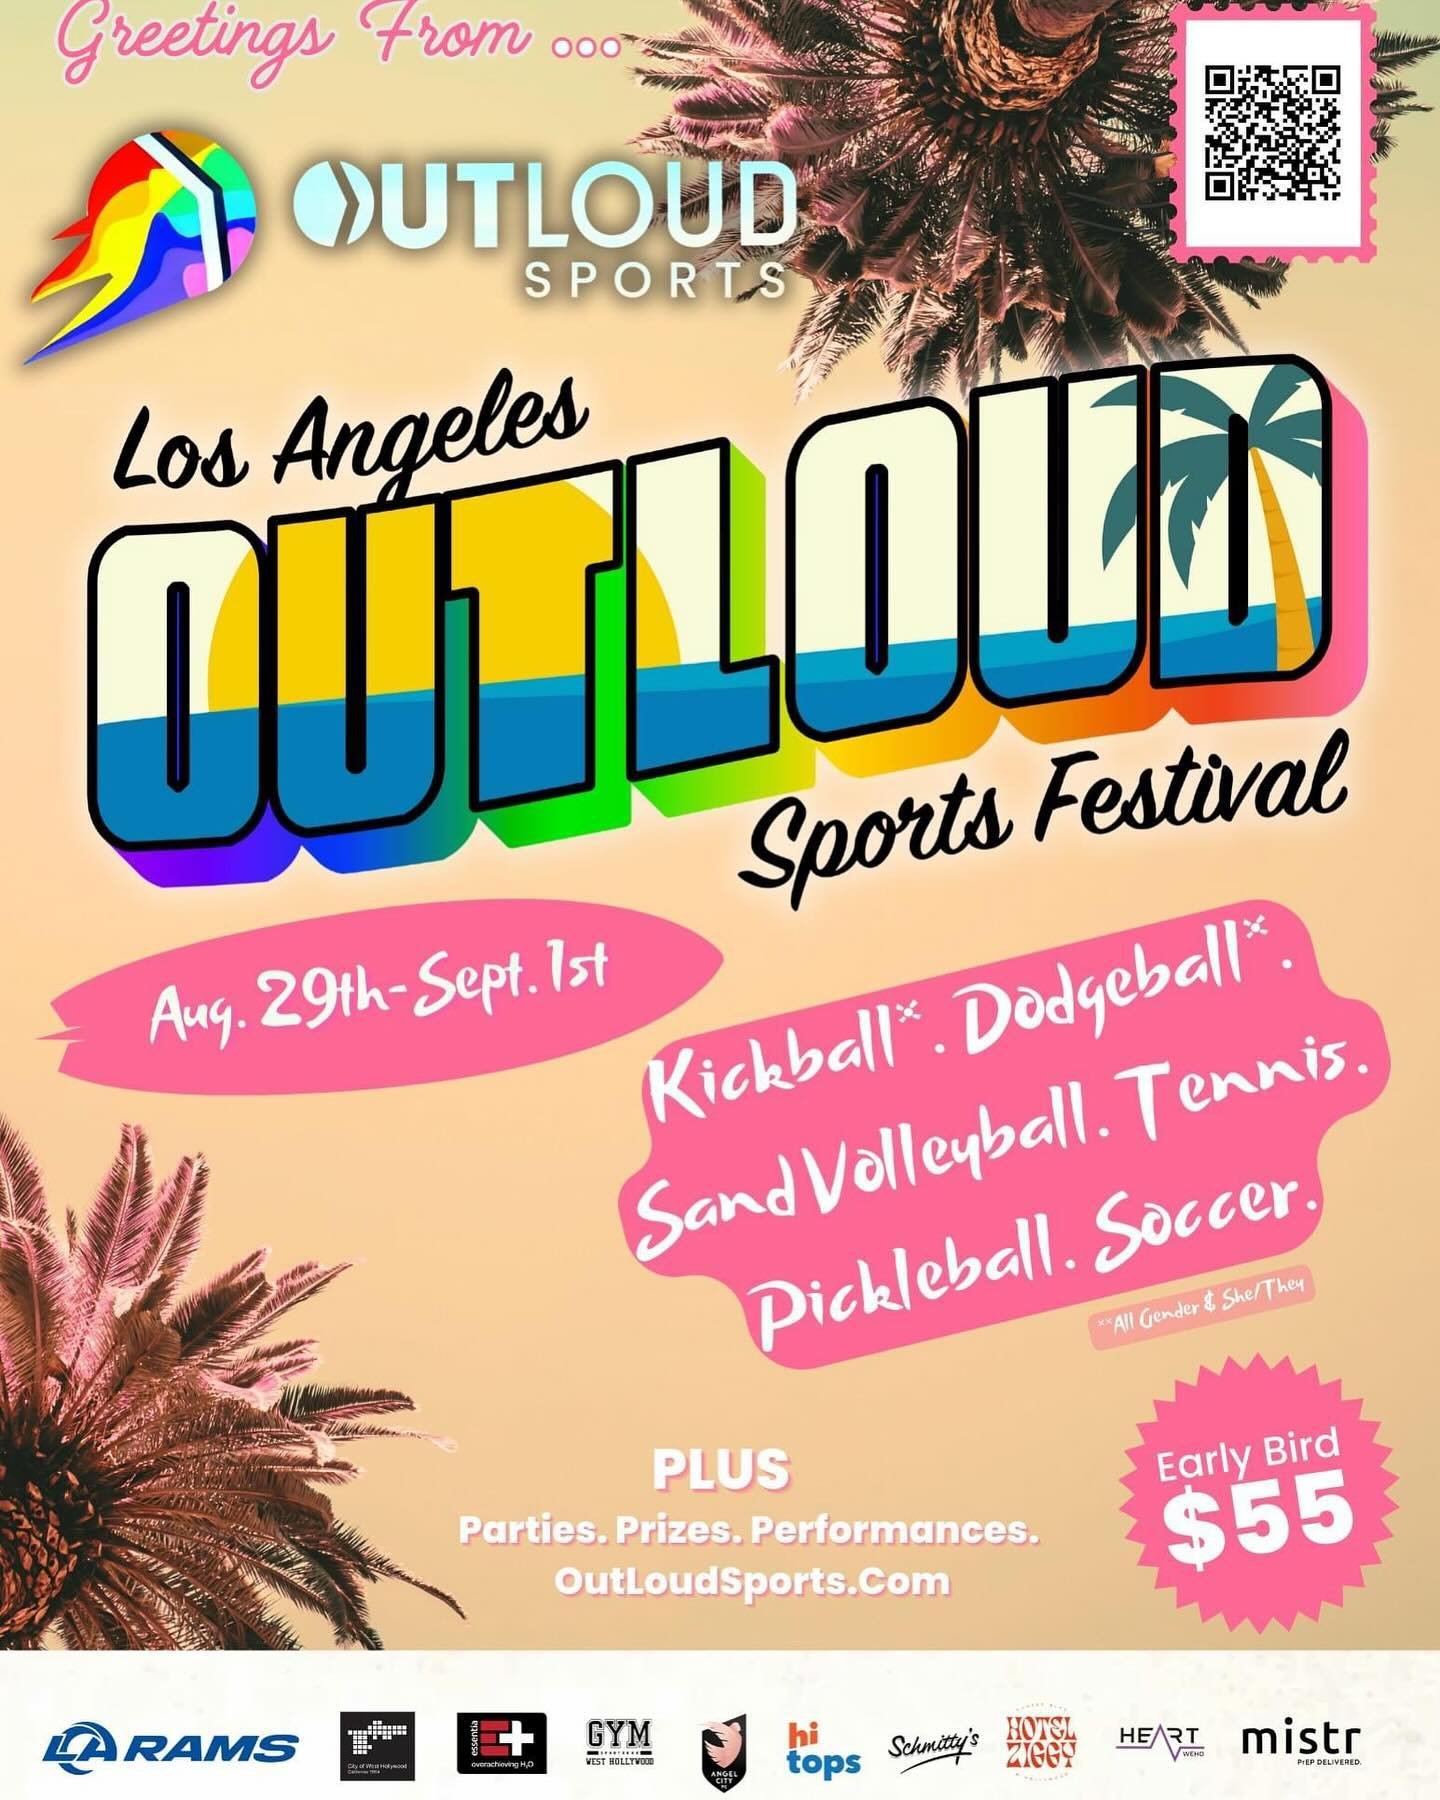 It&rsquo;s Tourney time, Long Beach!!! 🏆 Kickball | Dodgeball | 6v6 Soccer | Pickleball | Sand Volleyball | Double Tennis

Early bird is $55&hellip; so get registered ASAP! 

There will be events throughout the weekend! You KNOW you don&rsquo;t wann